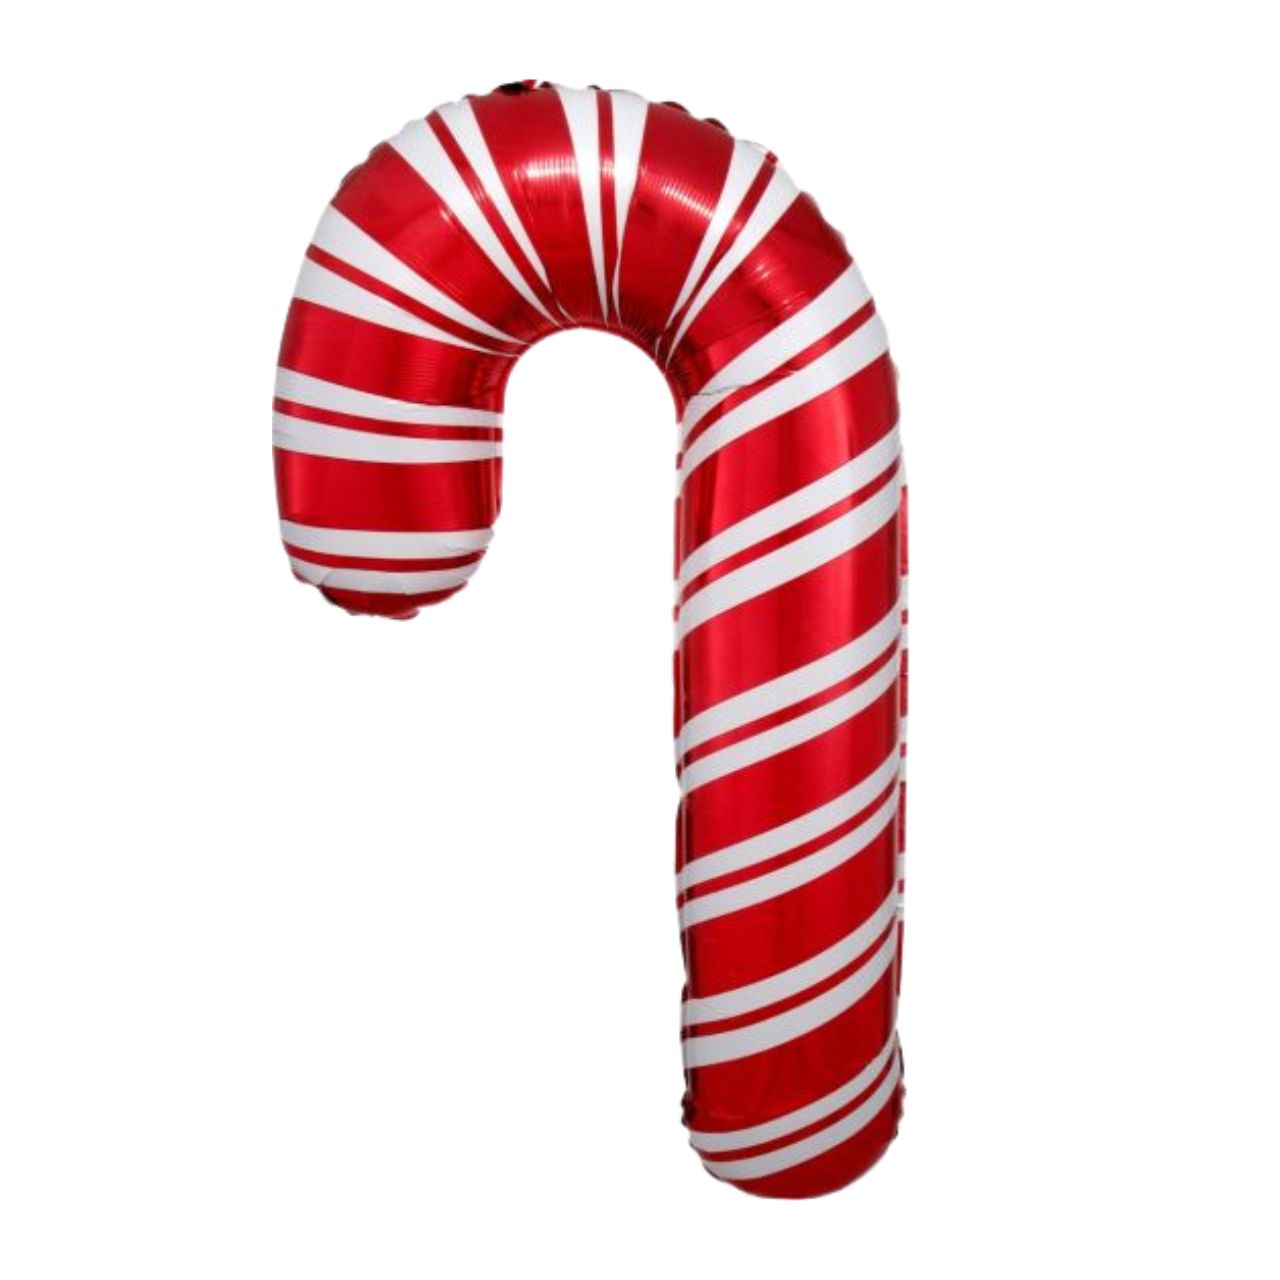 Red Candy Cane Supershape Foil Balloon